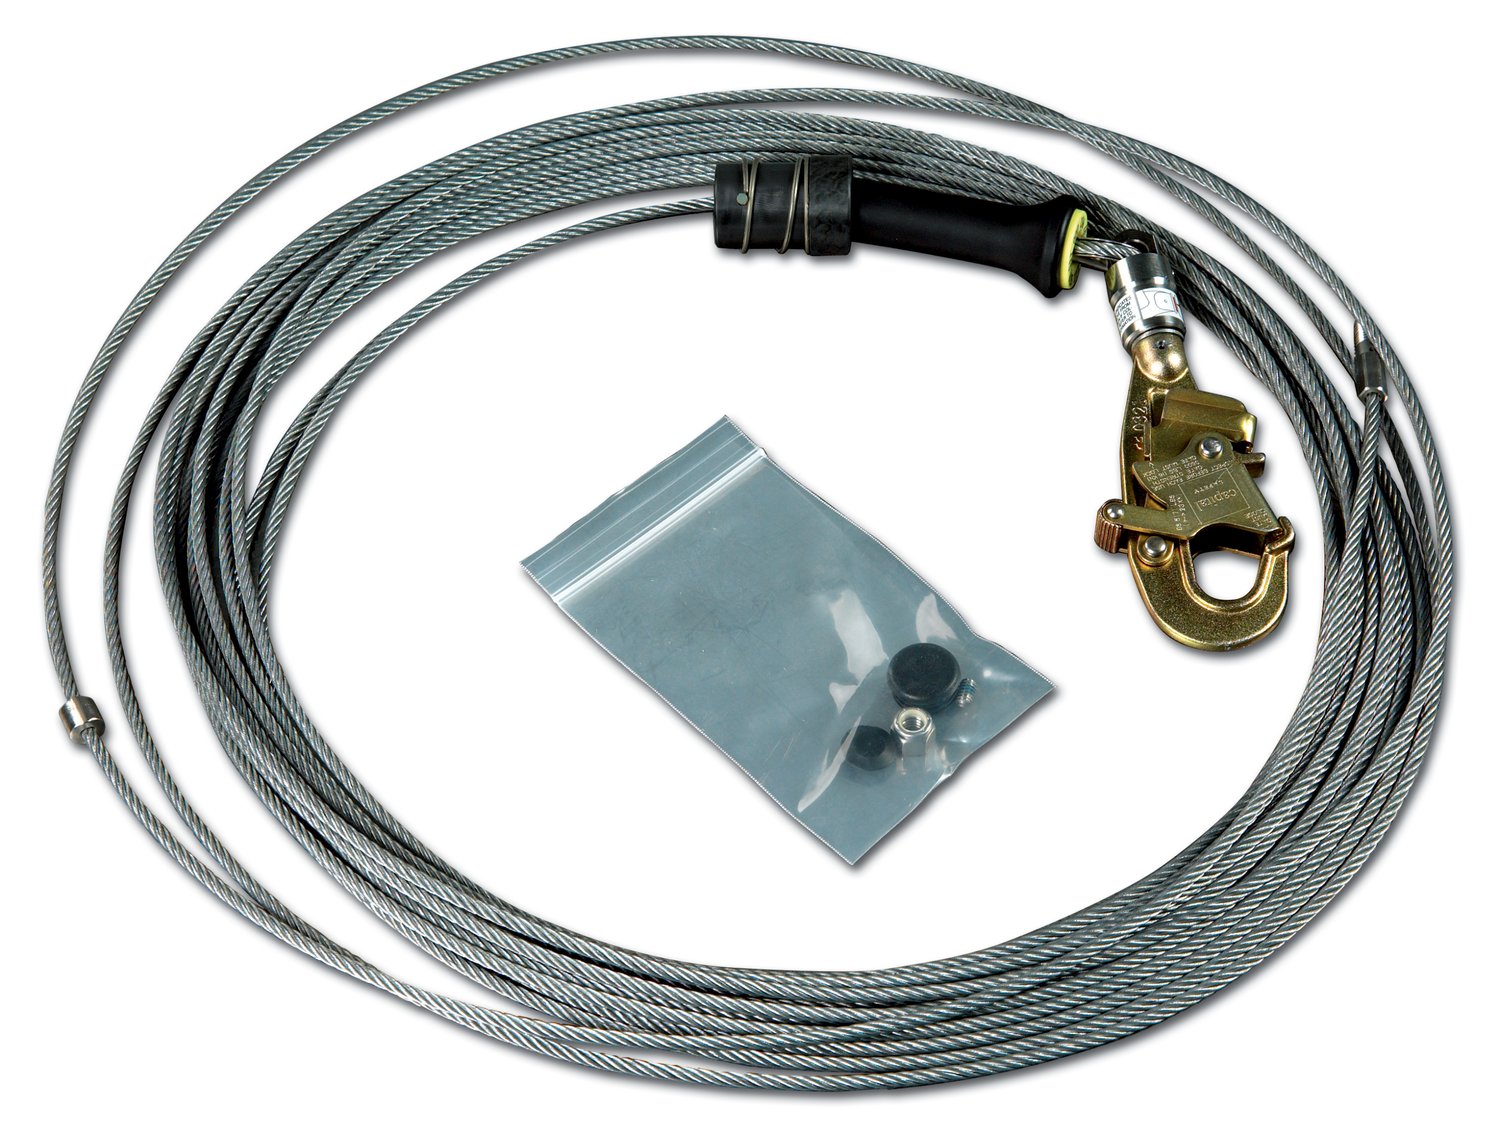 7100310049 - 3M DBI-SALA Sealed-Blok Self-Retracting Lifeline Cable Assembly
3900112, Stainless Steel, 130 ft